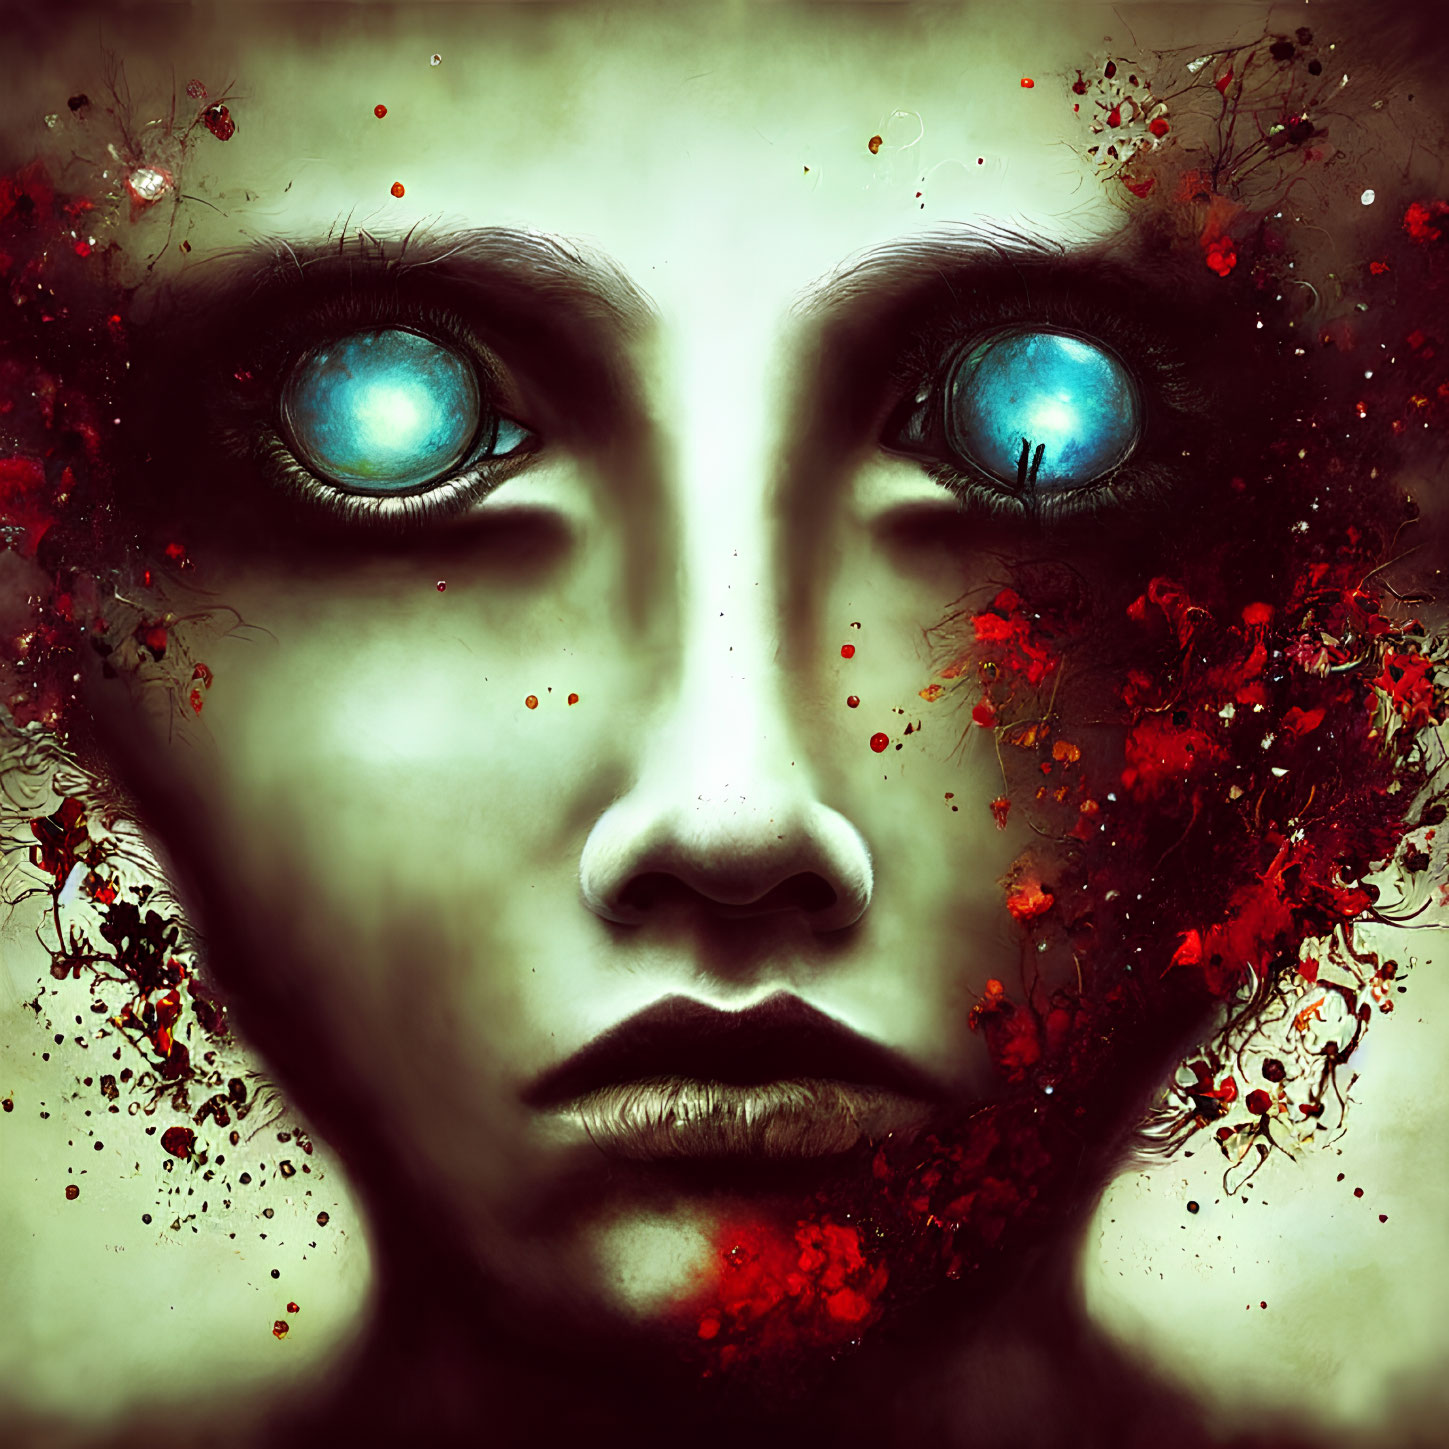 Artistic image of face with blue eyes and red splatters on dark background